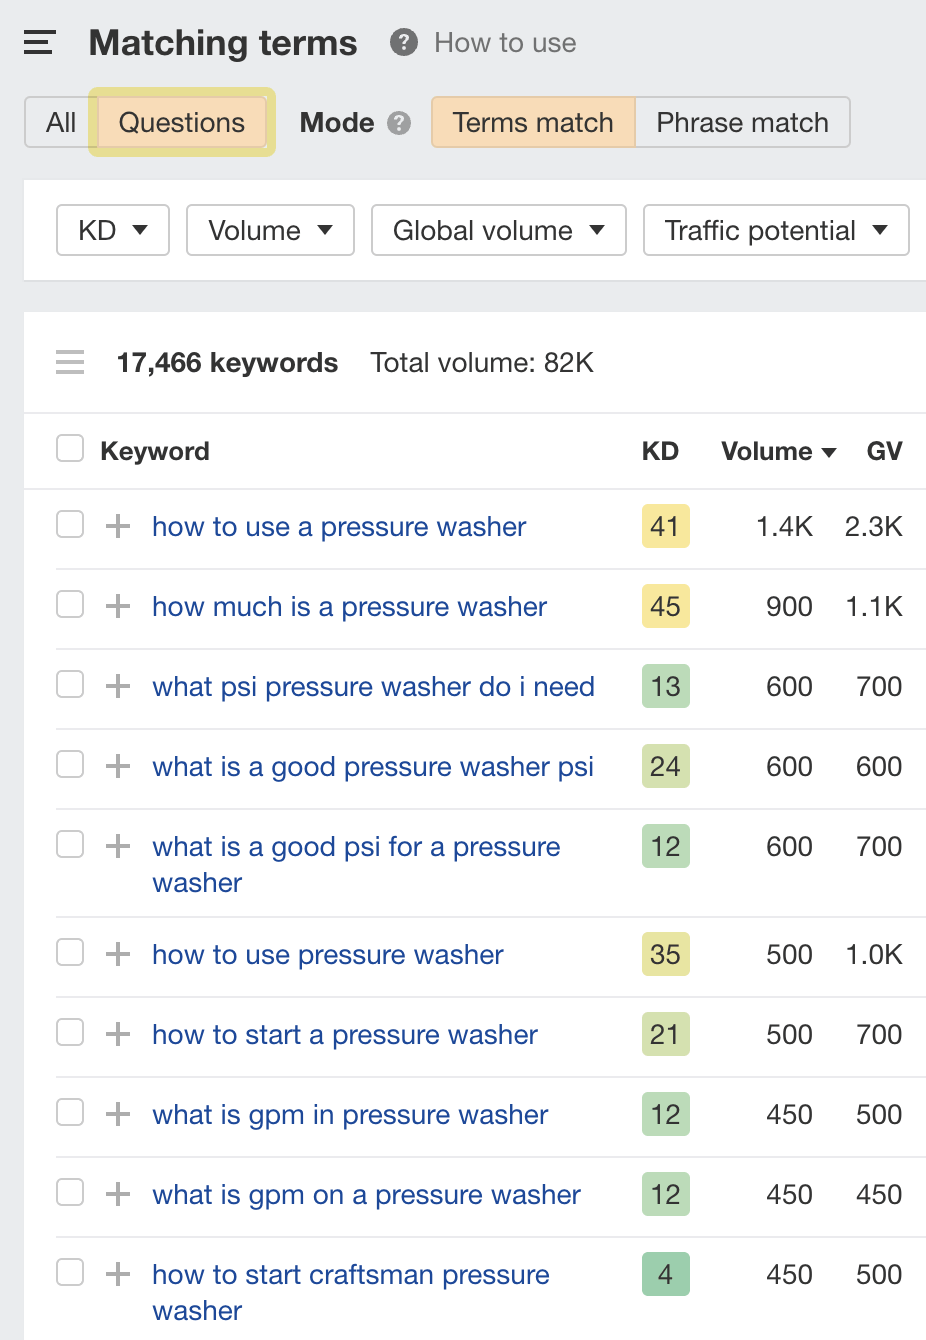 Mat،g terms report for "pressure washer" filtered by Questions, via Ahrefs' Keywords Explorer
